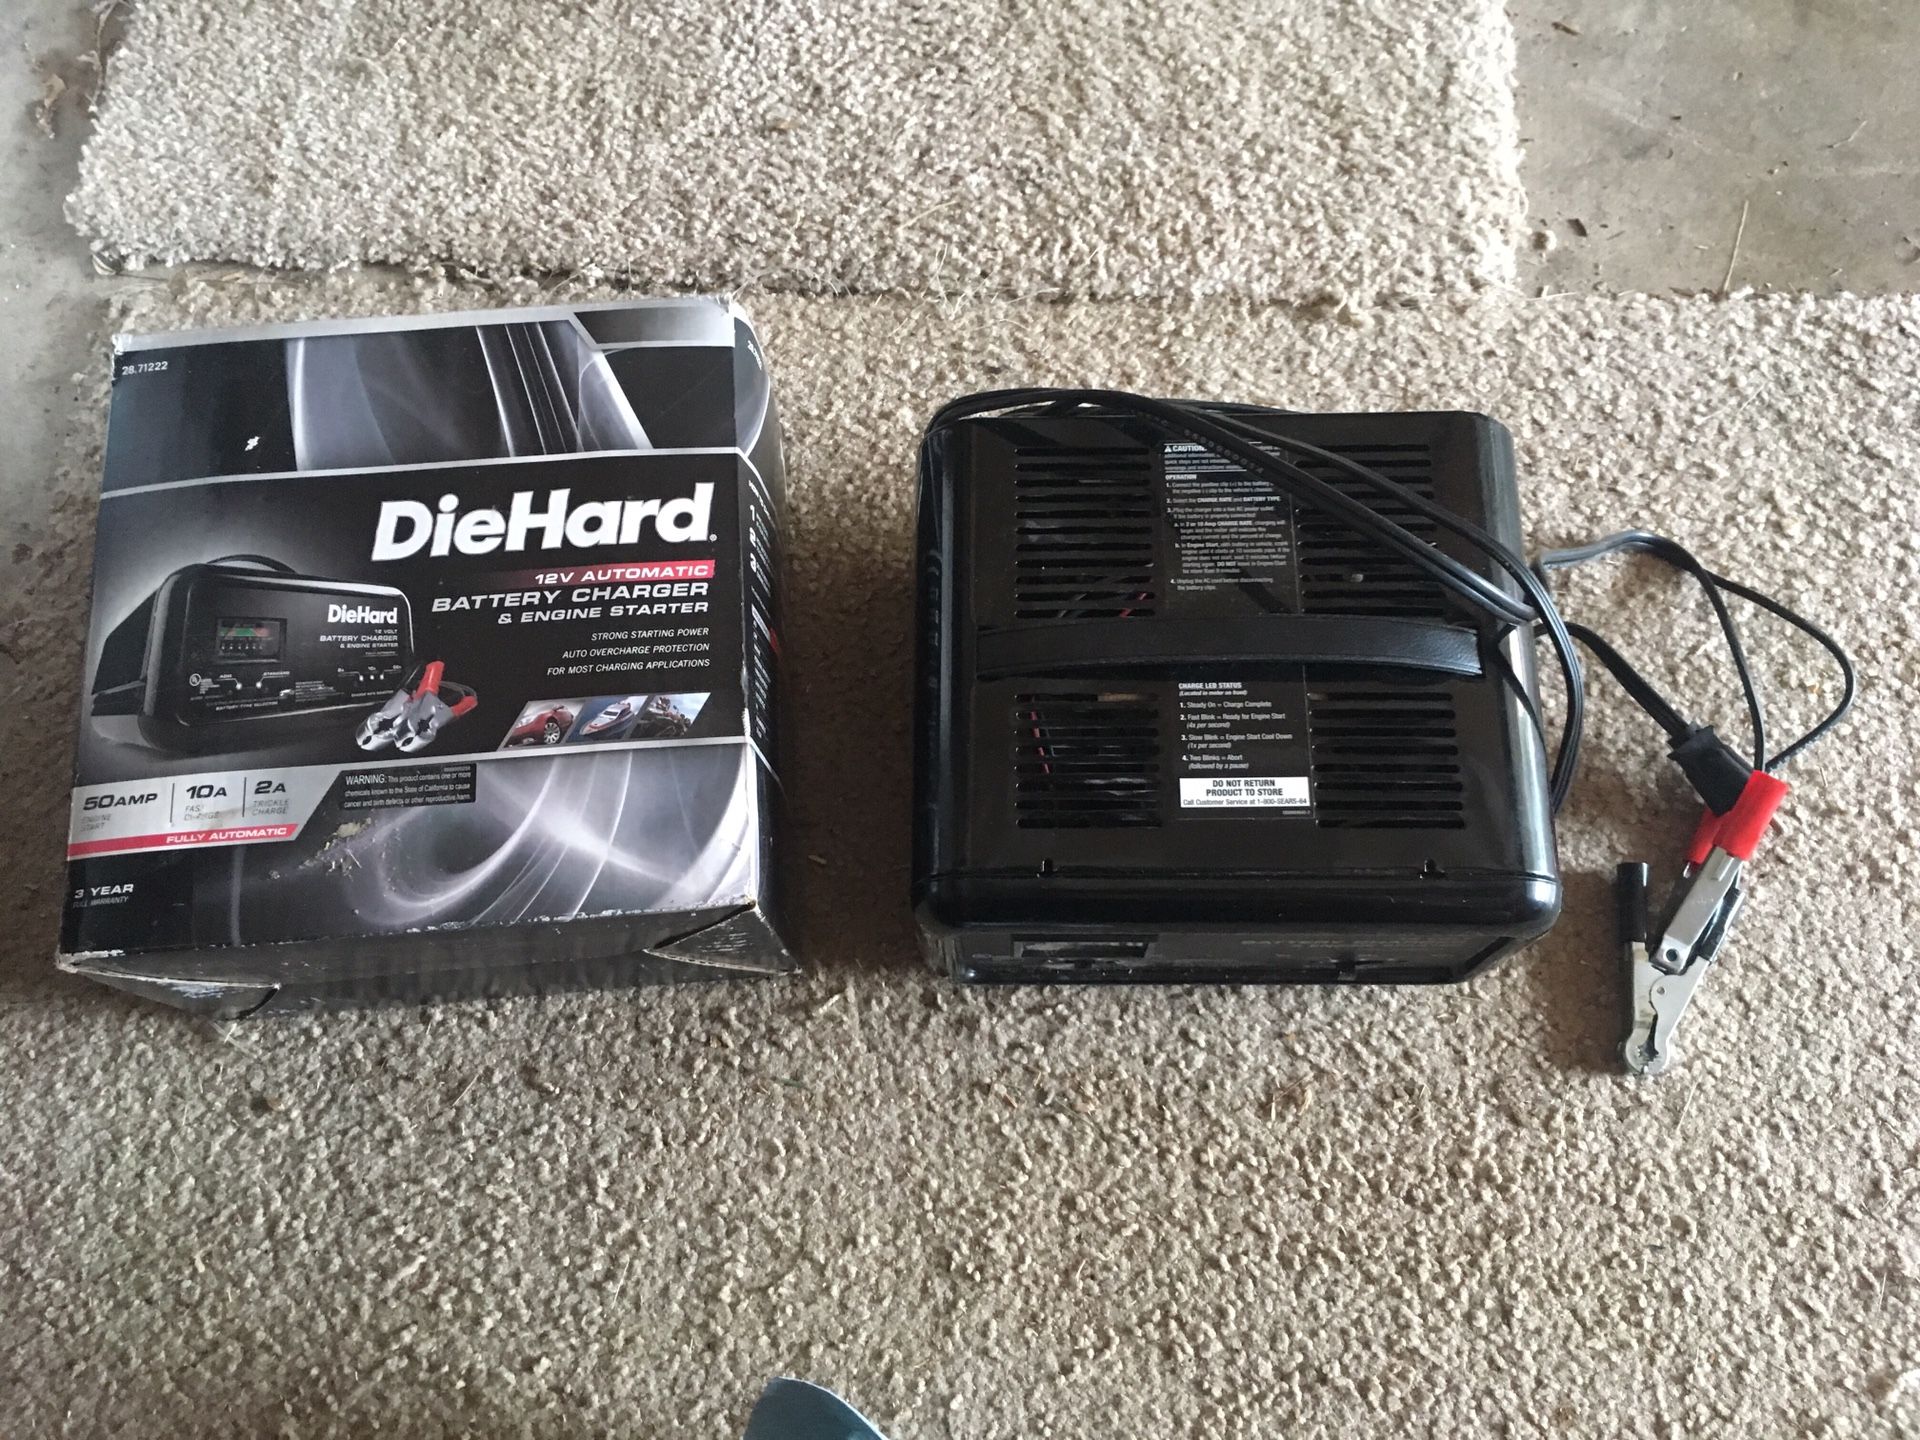 DIE HARD BATTERY CHARGER W/ ENGINE START